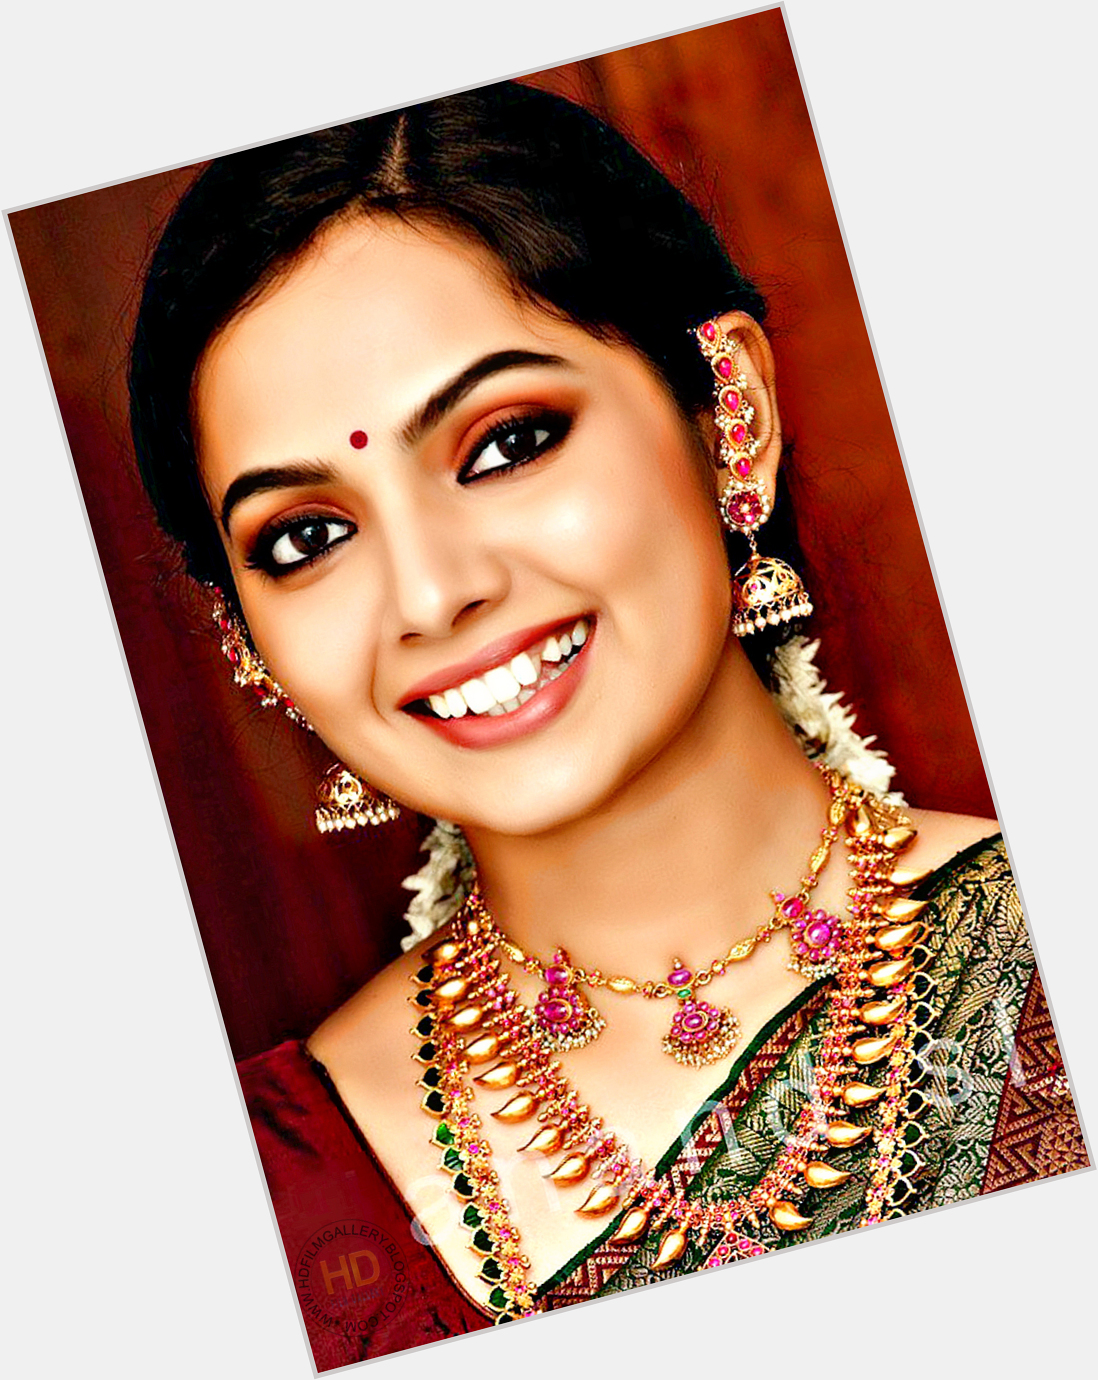 Samvrutha Sunil | Official Site for Woman Crush Wednesday #WCW